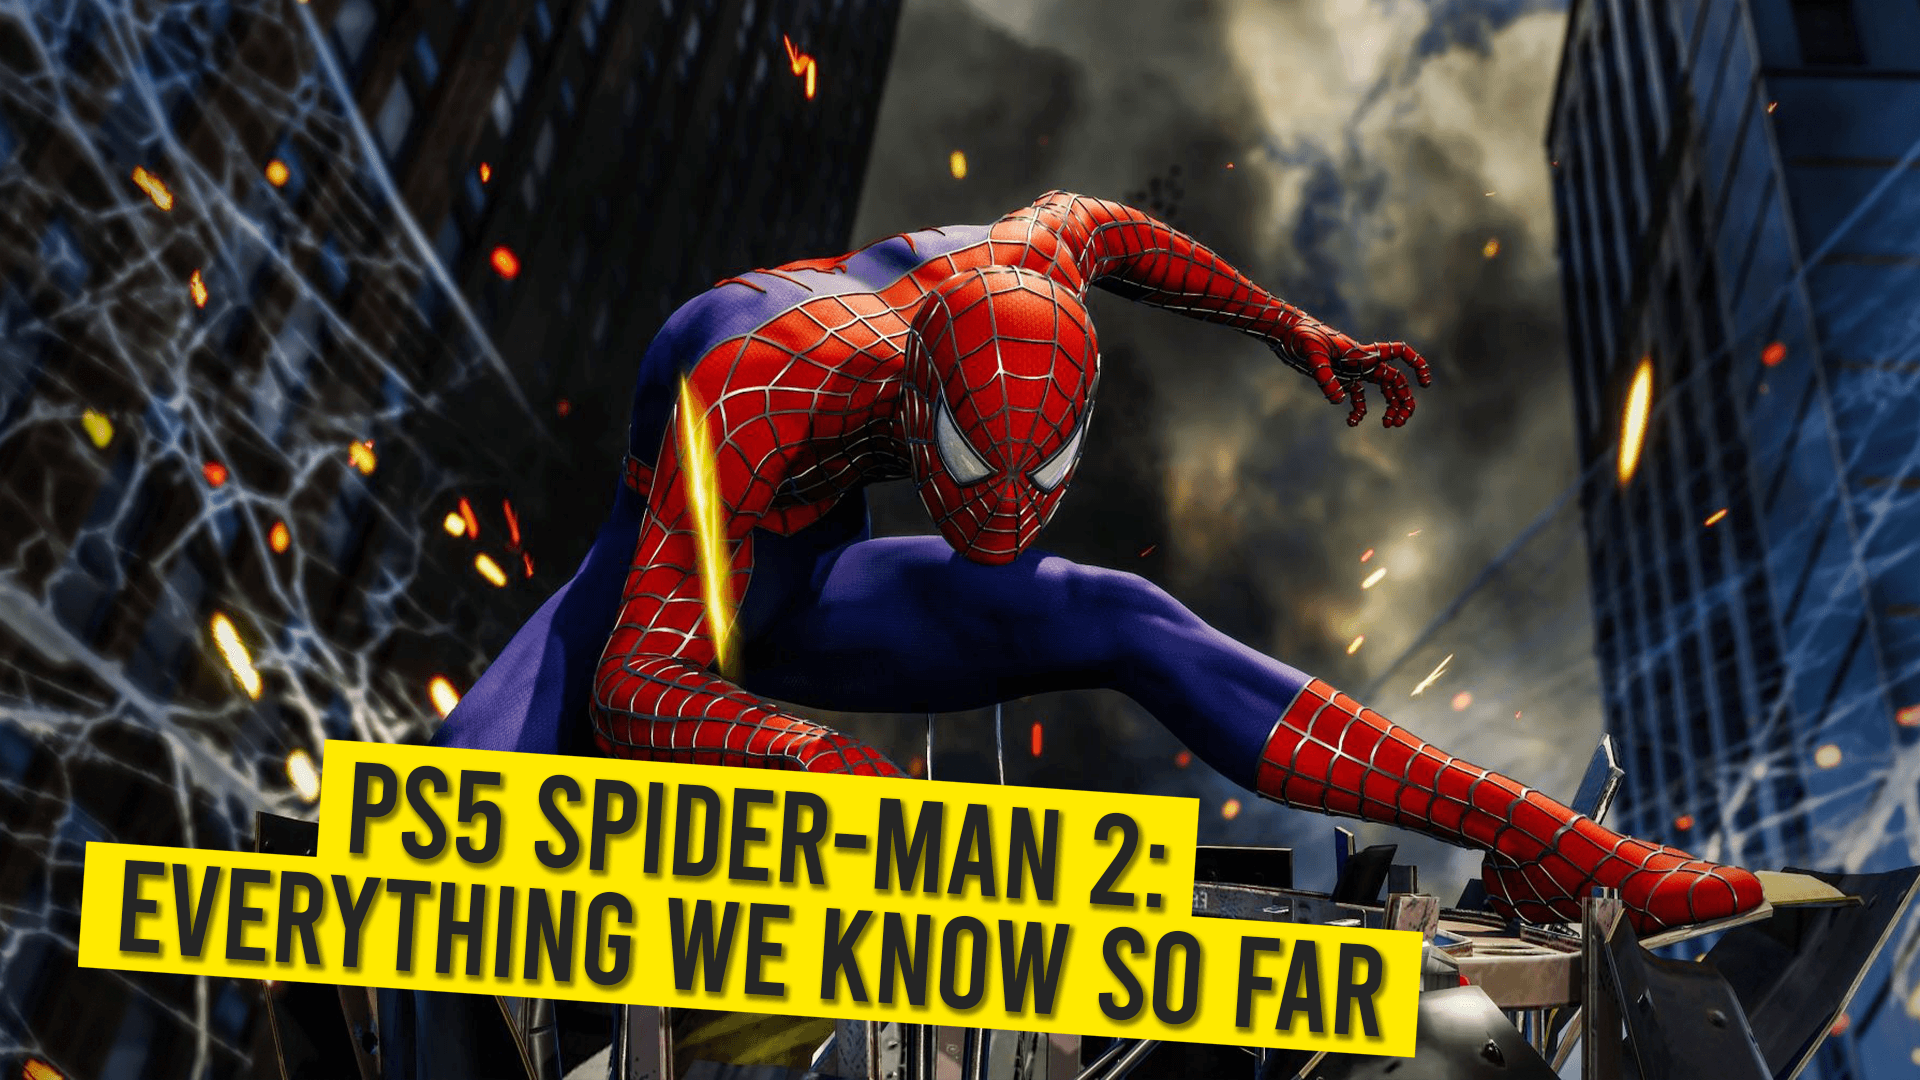 PS5 Spider-Man 2: Everything We Know So Far